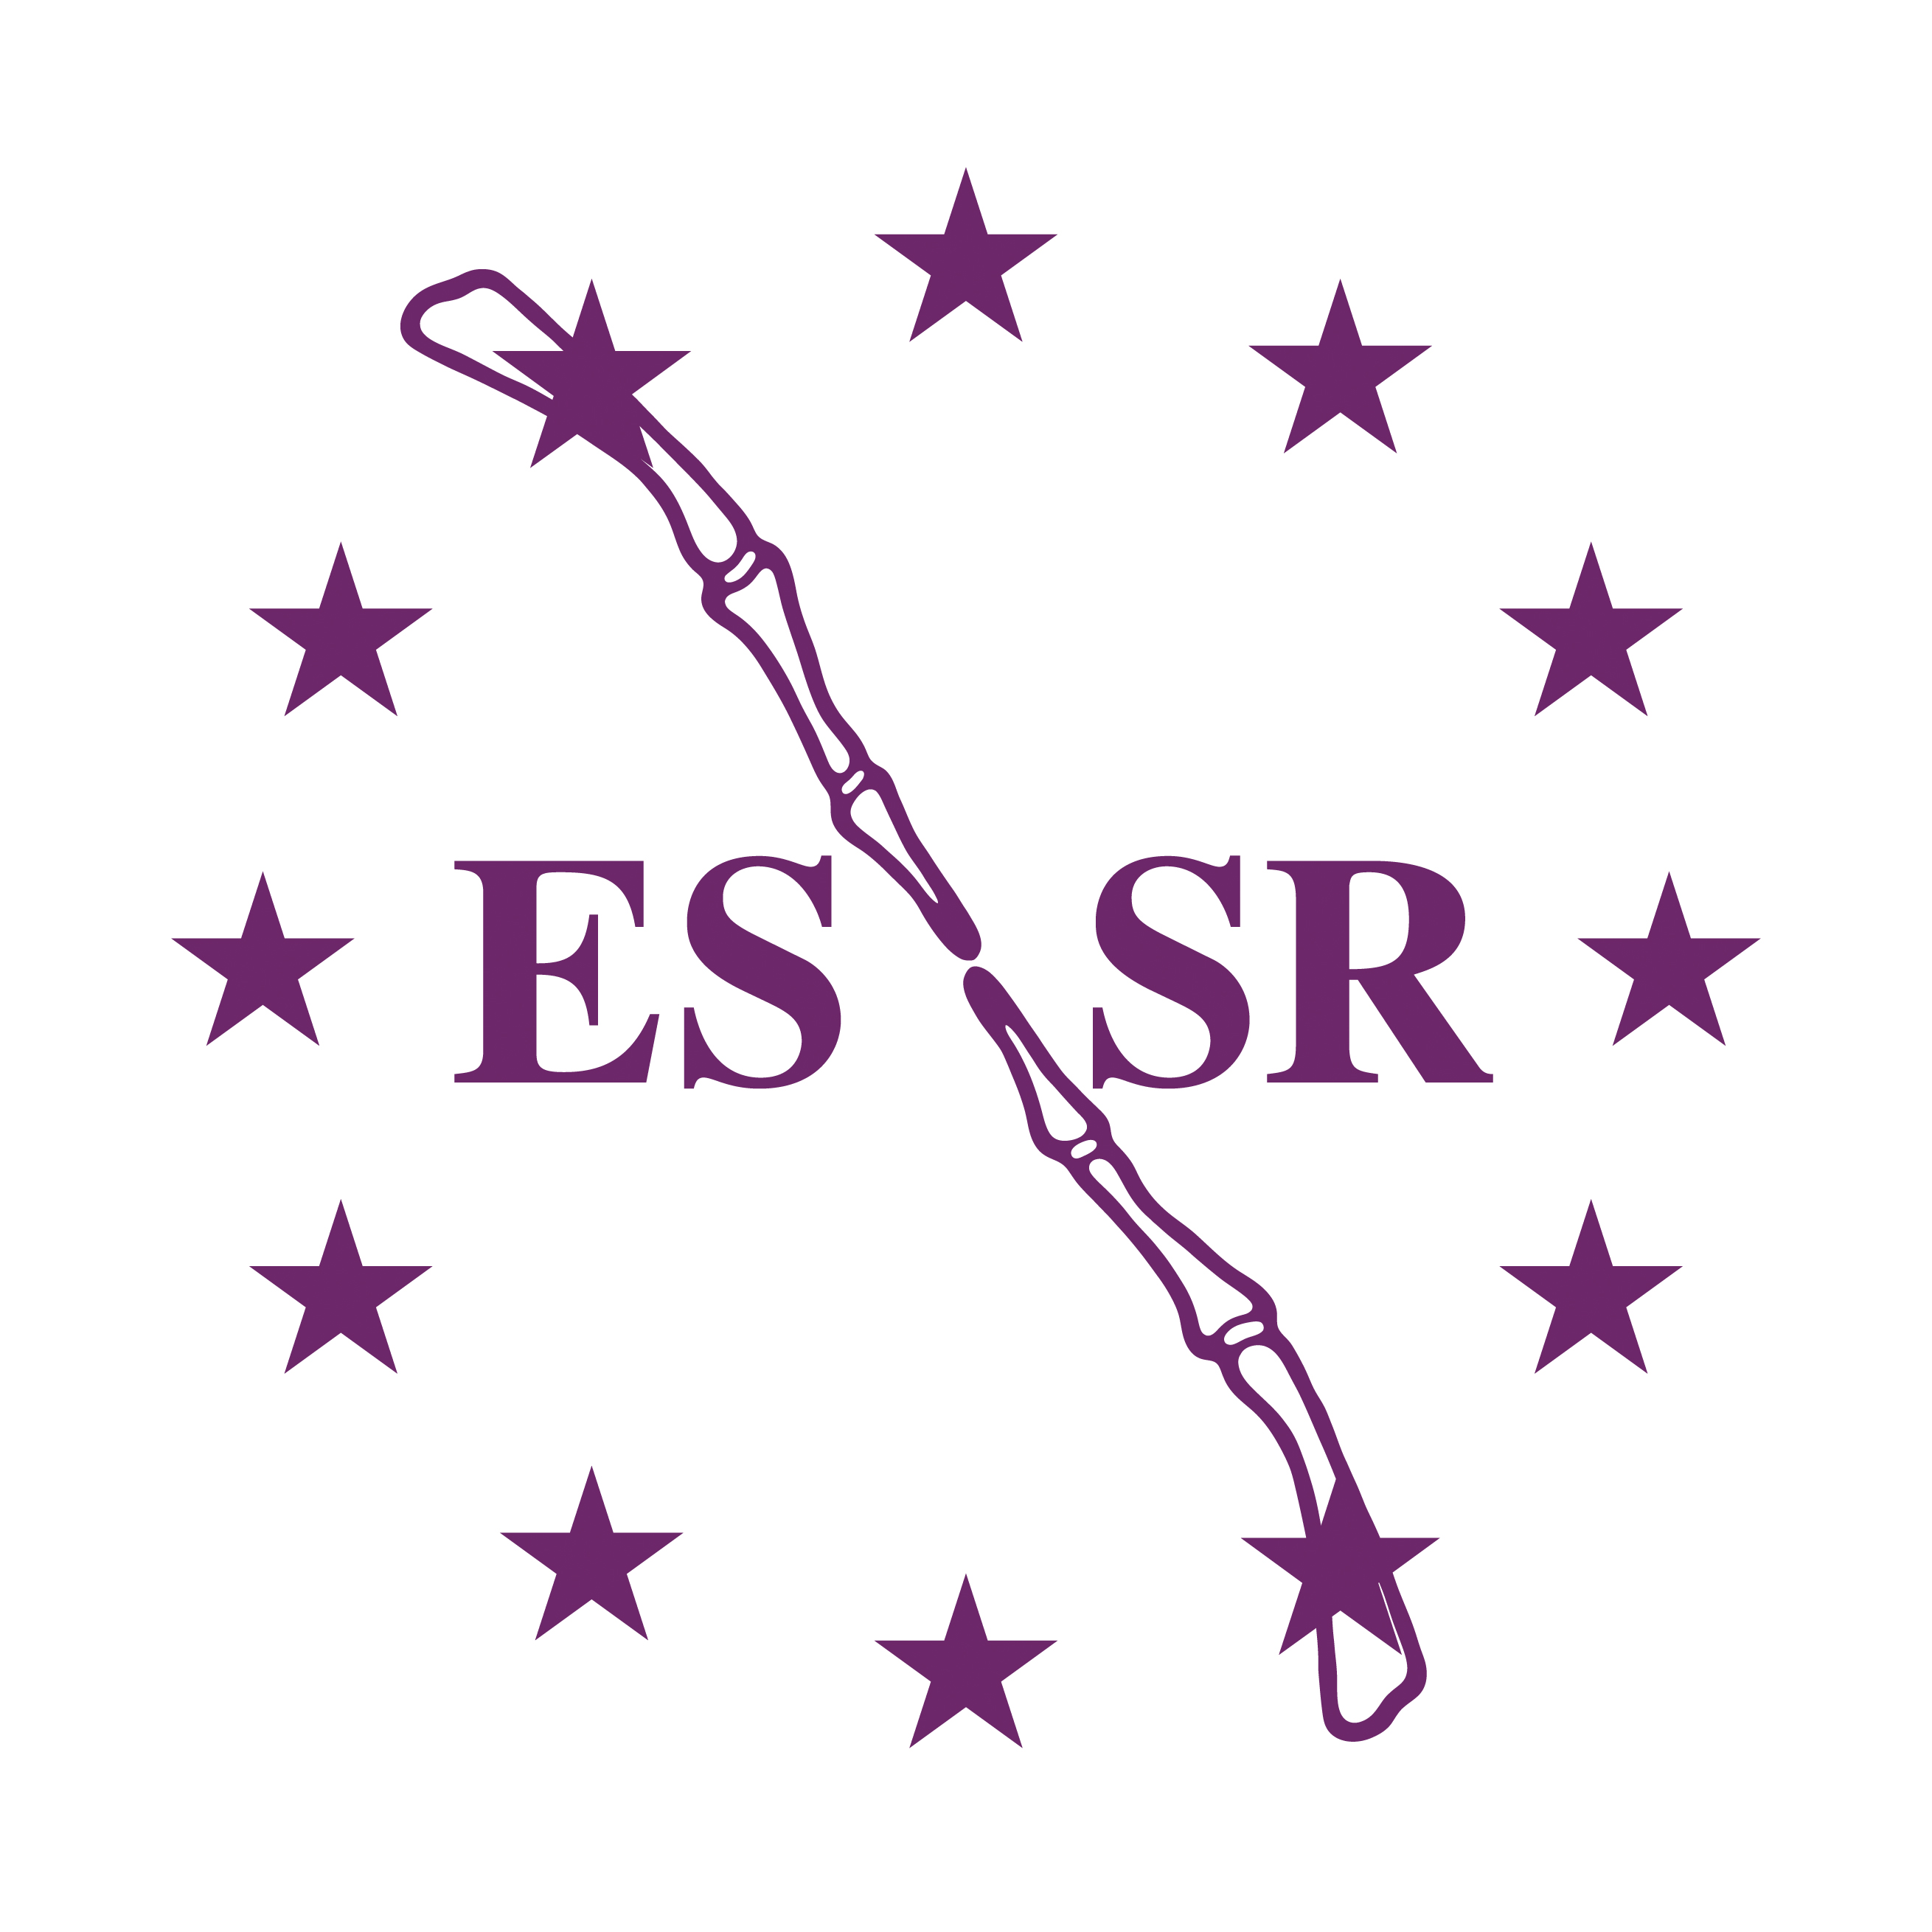 ESSR 2022 - Annual Scientific Meeting of The European Society of Musculoskeletal Radiology